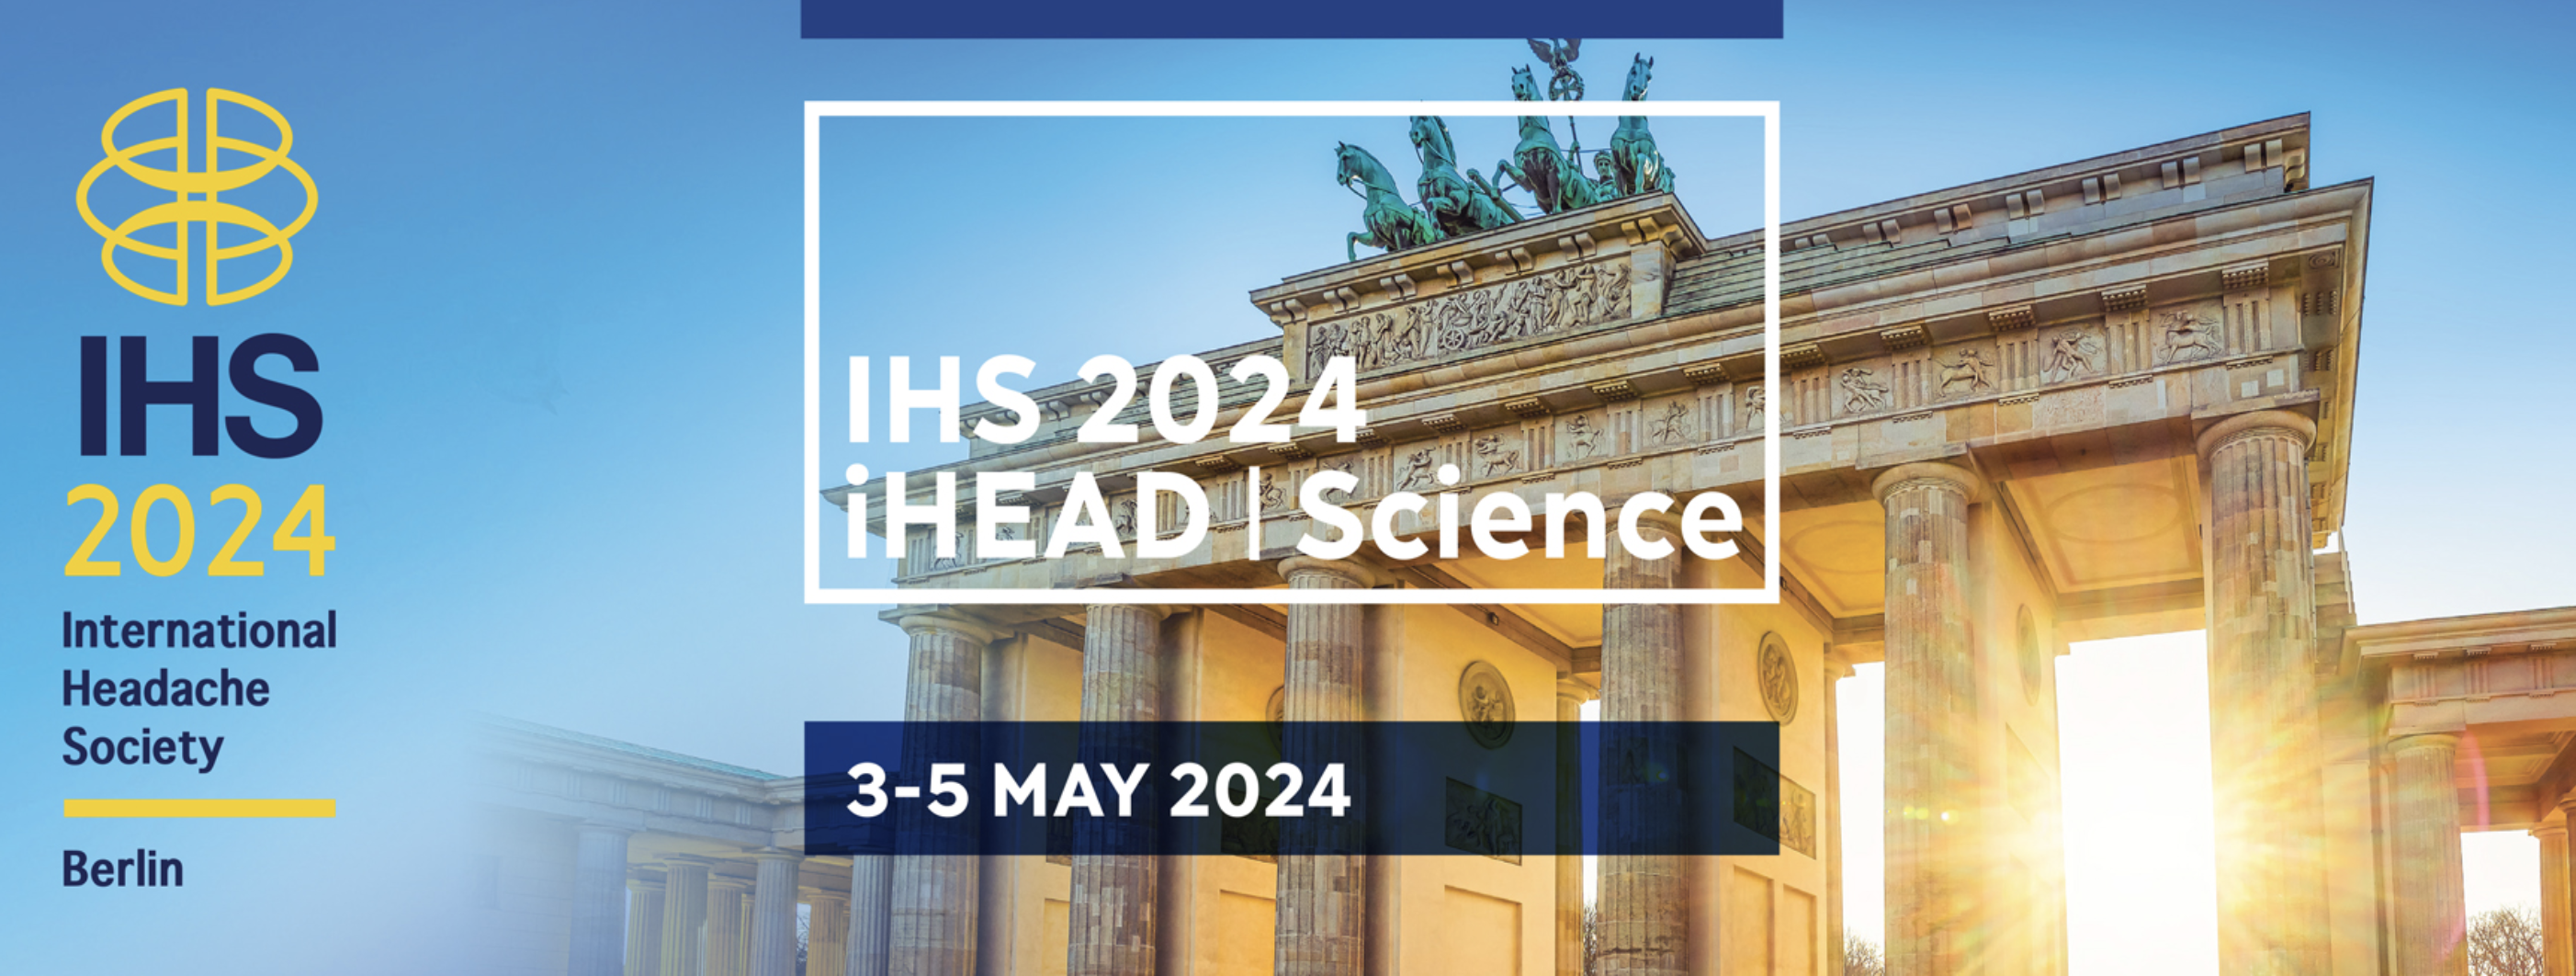 Event we visit - IHS 2024 iHEAD | Science